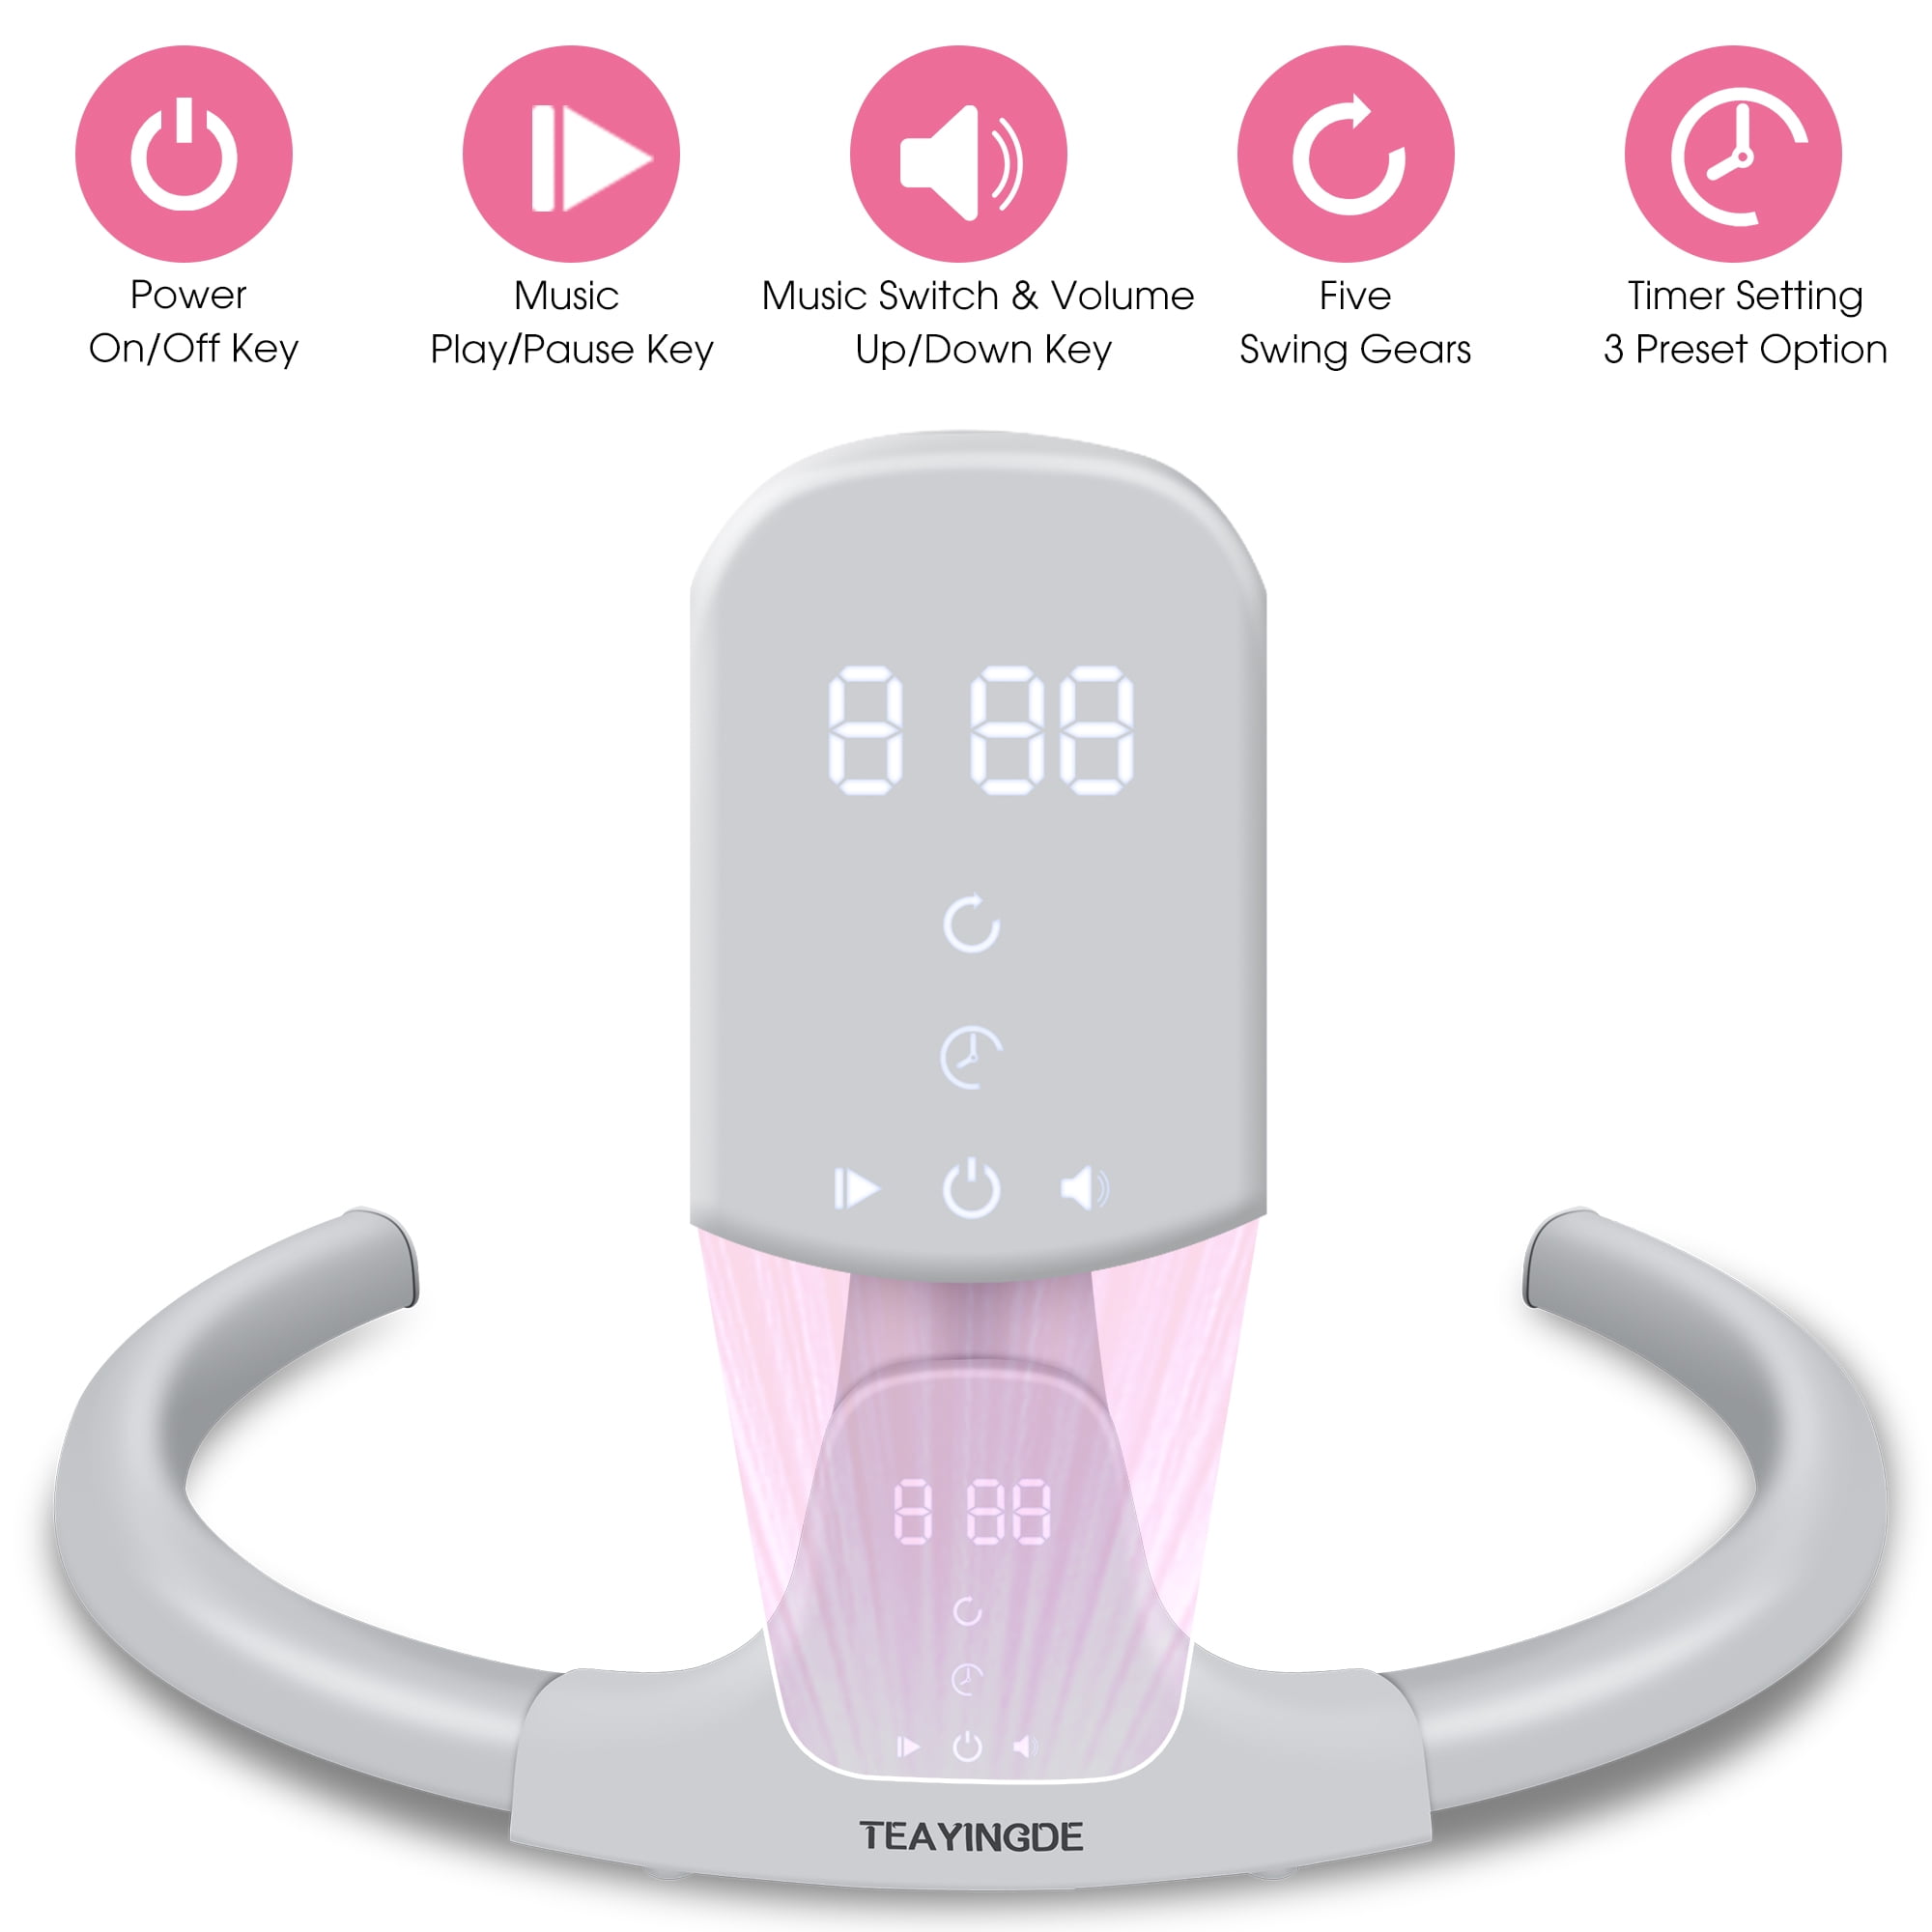 TEAYINGDE Baby Swing for Infants - APP Remote Bluetooth Control, 5 Speed Settings, 10 Lullabies, USB Plug (Pink)